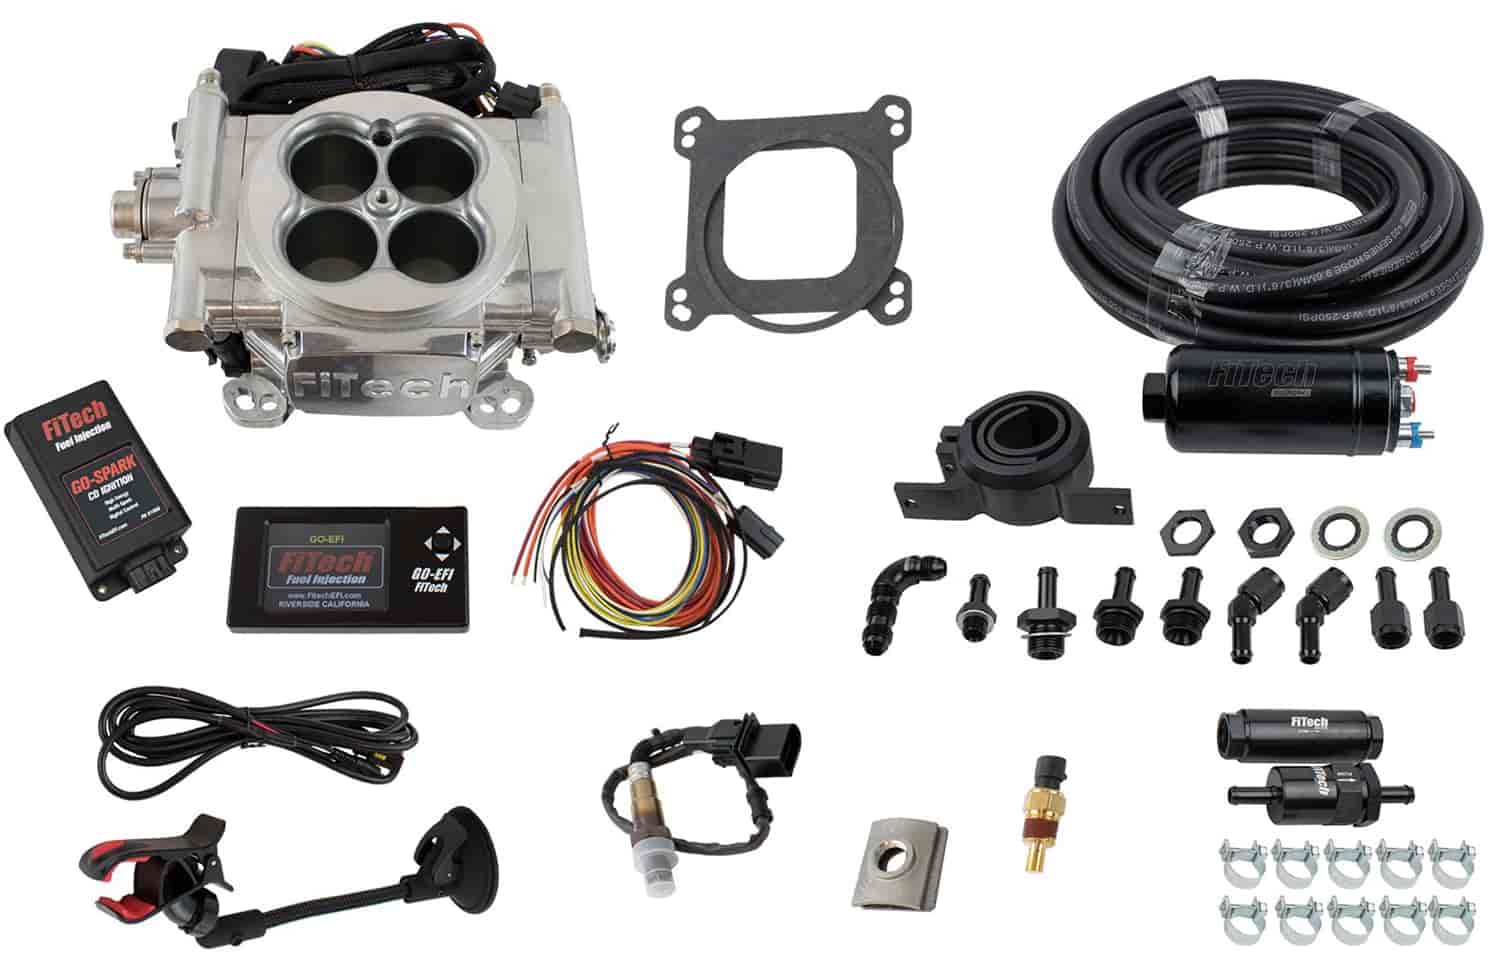 Go EFI-4 600 HP Throttle Body Fuel Injection Master Kit [In-line Fuel Pump and CDI Box] Bright Aluminum